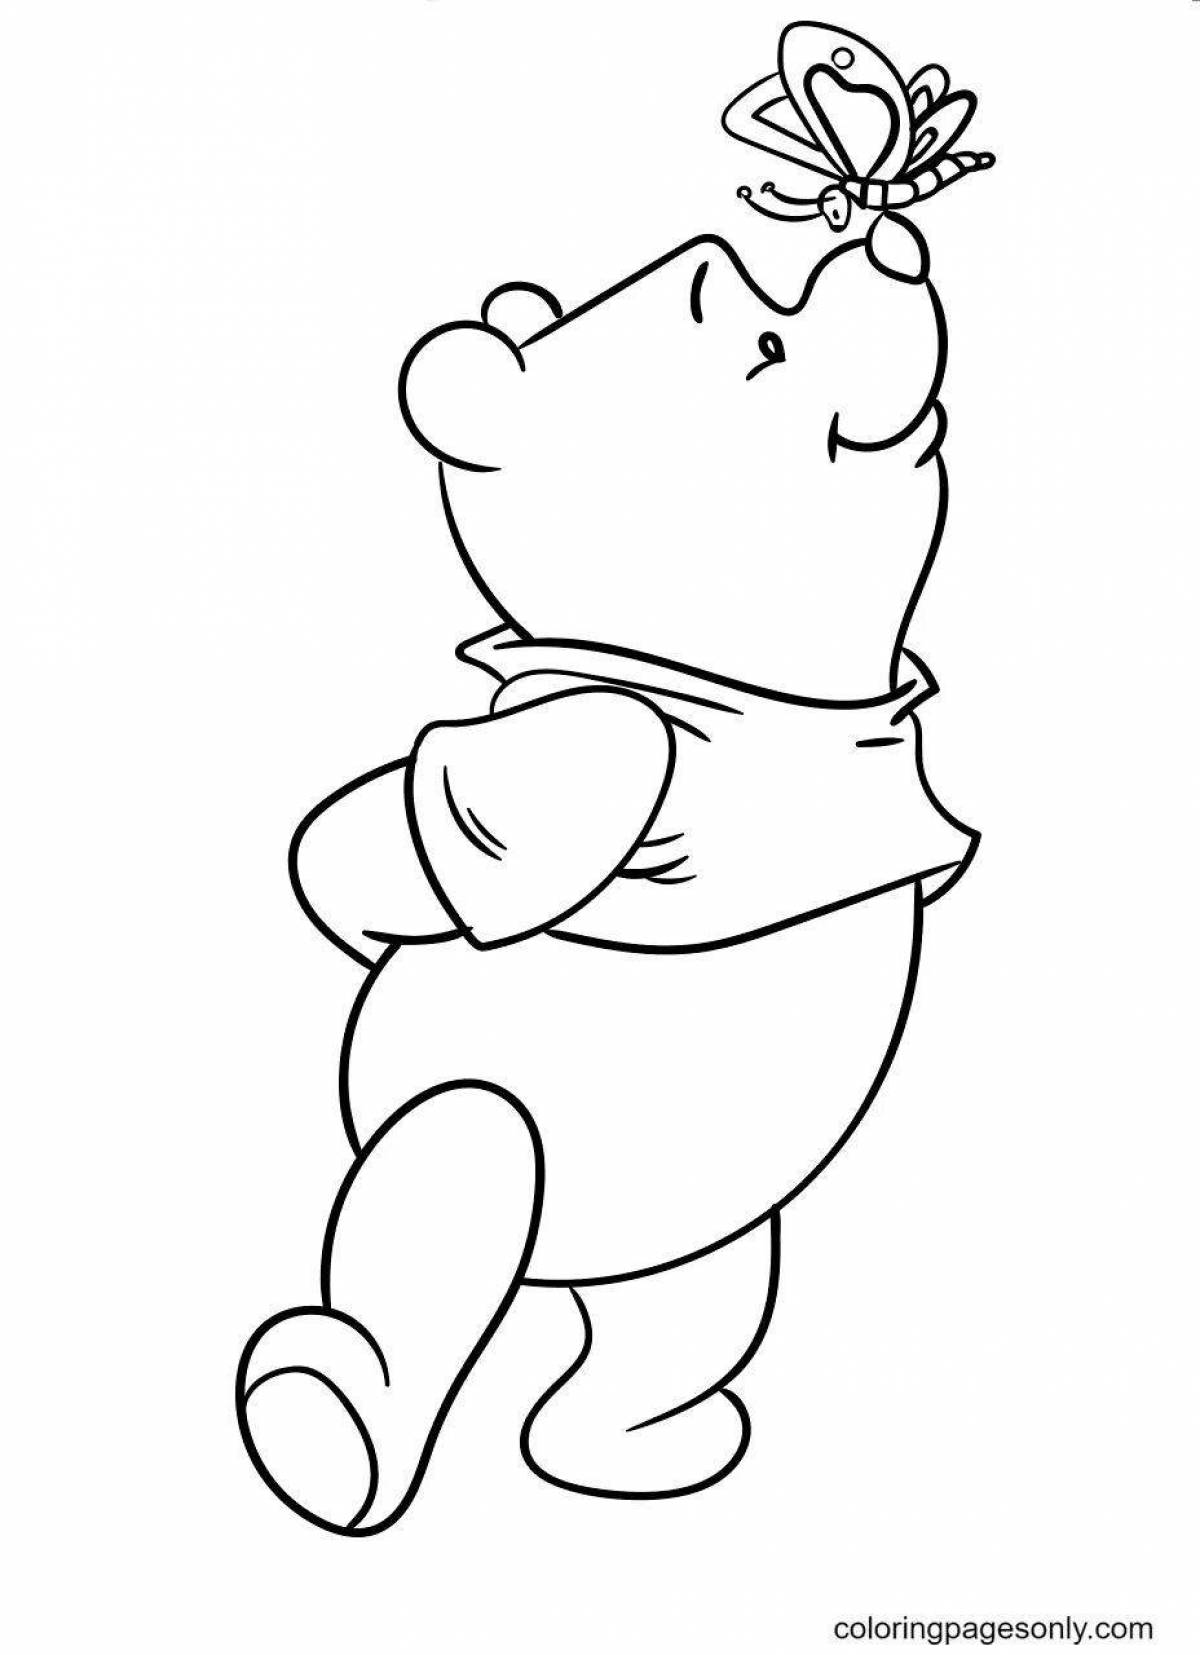 Coloring quirky winnie the pooh